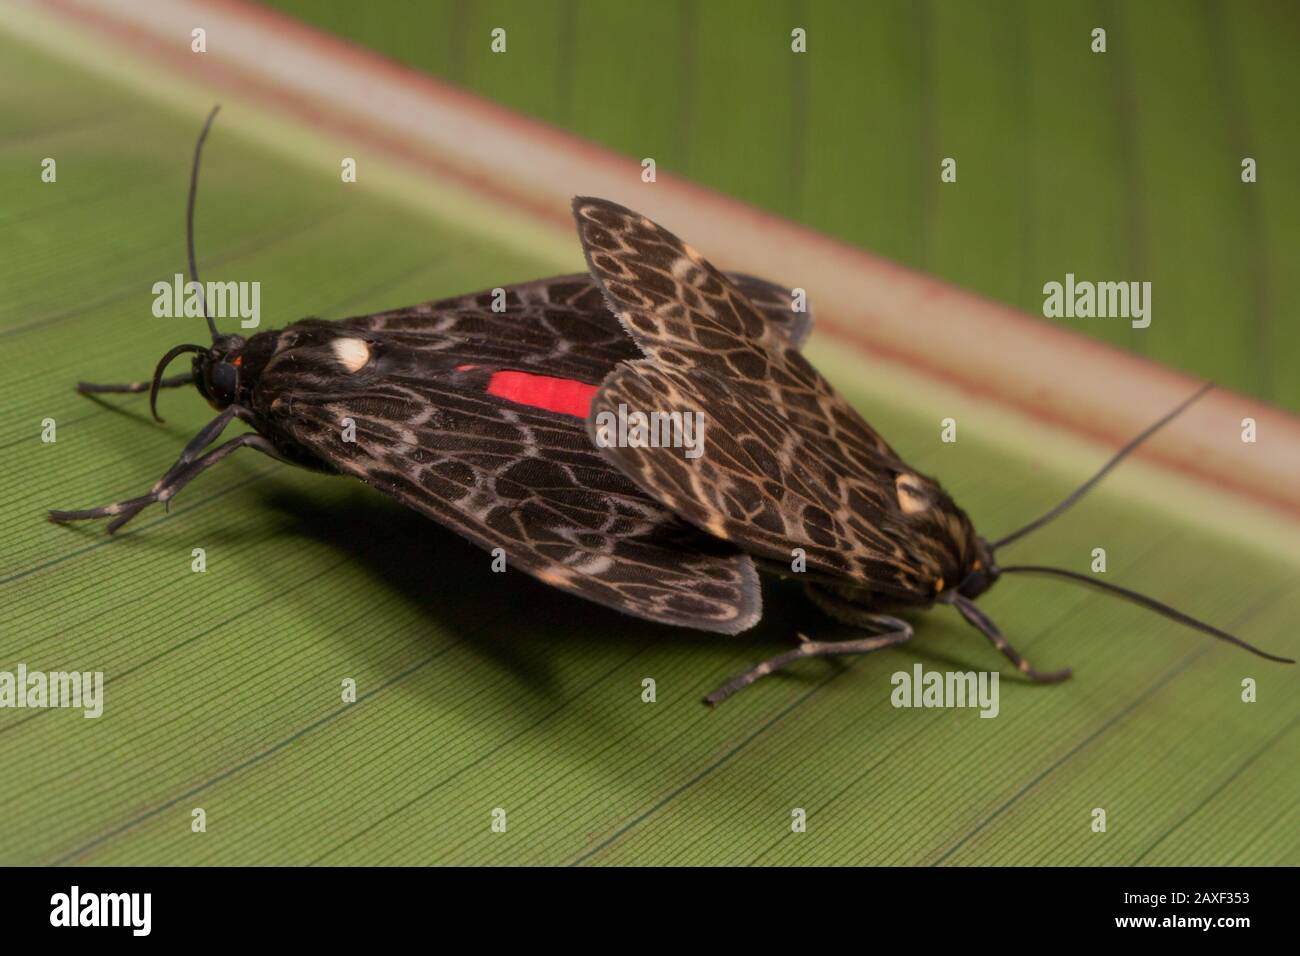 Couple of moths mating on a leaf in a tropical garden Stock Photo